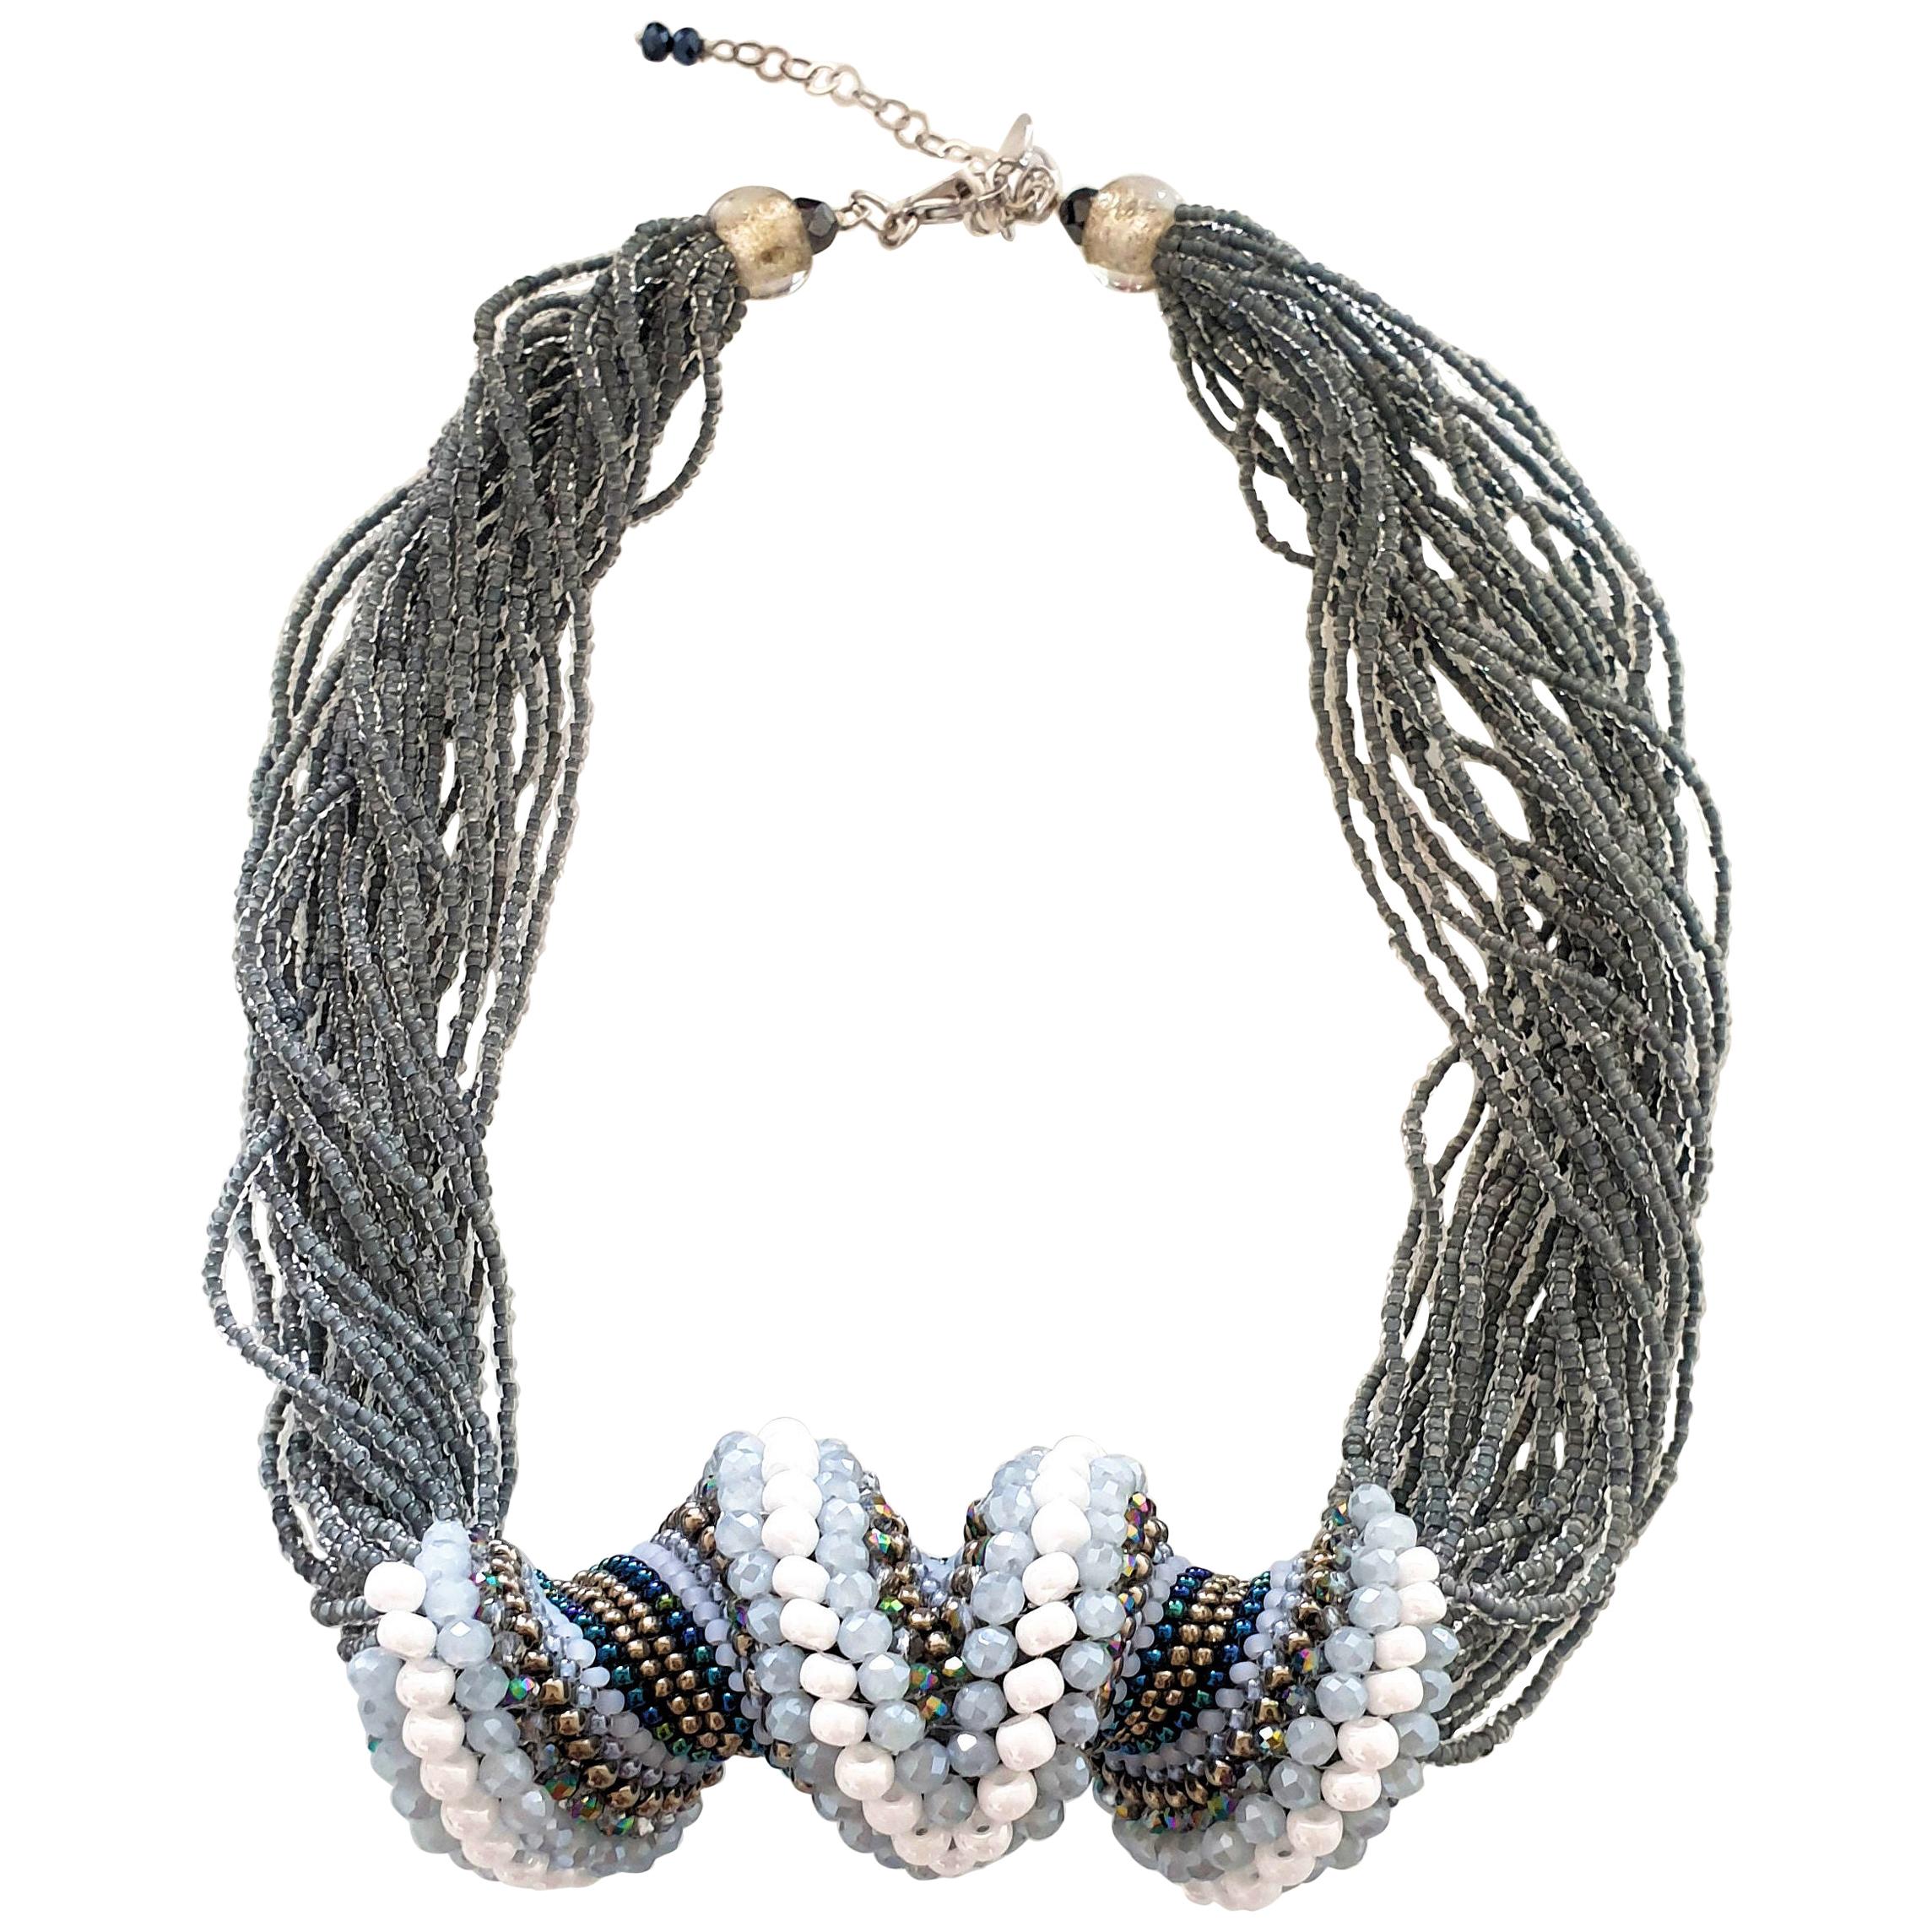 Murano Glass Gray/ White Beads Hand Made Fashion Necklace by Artist Paola B.